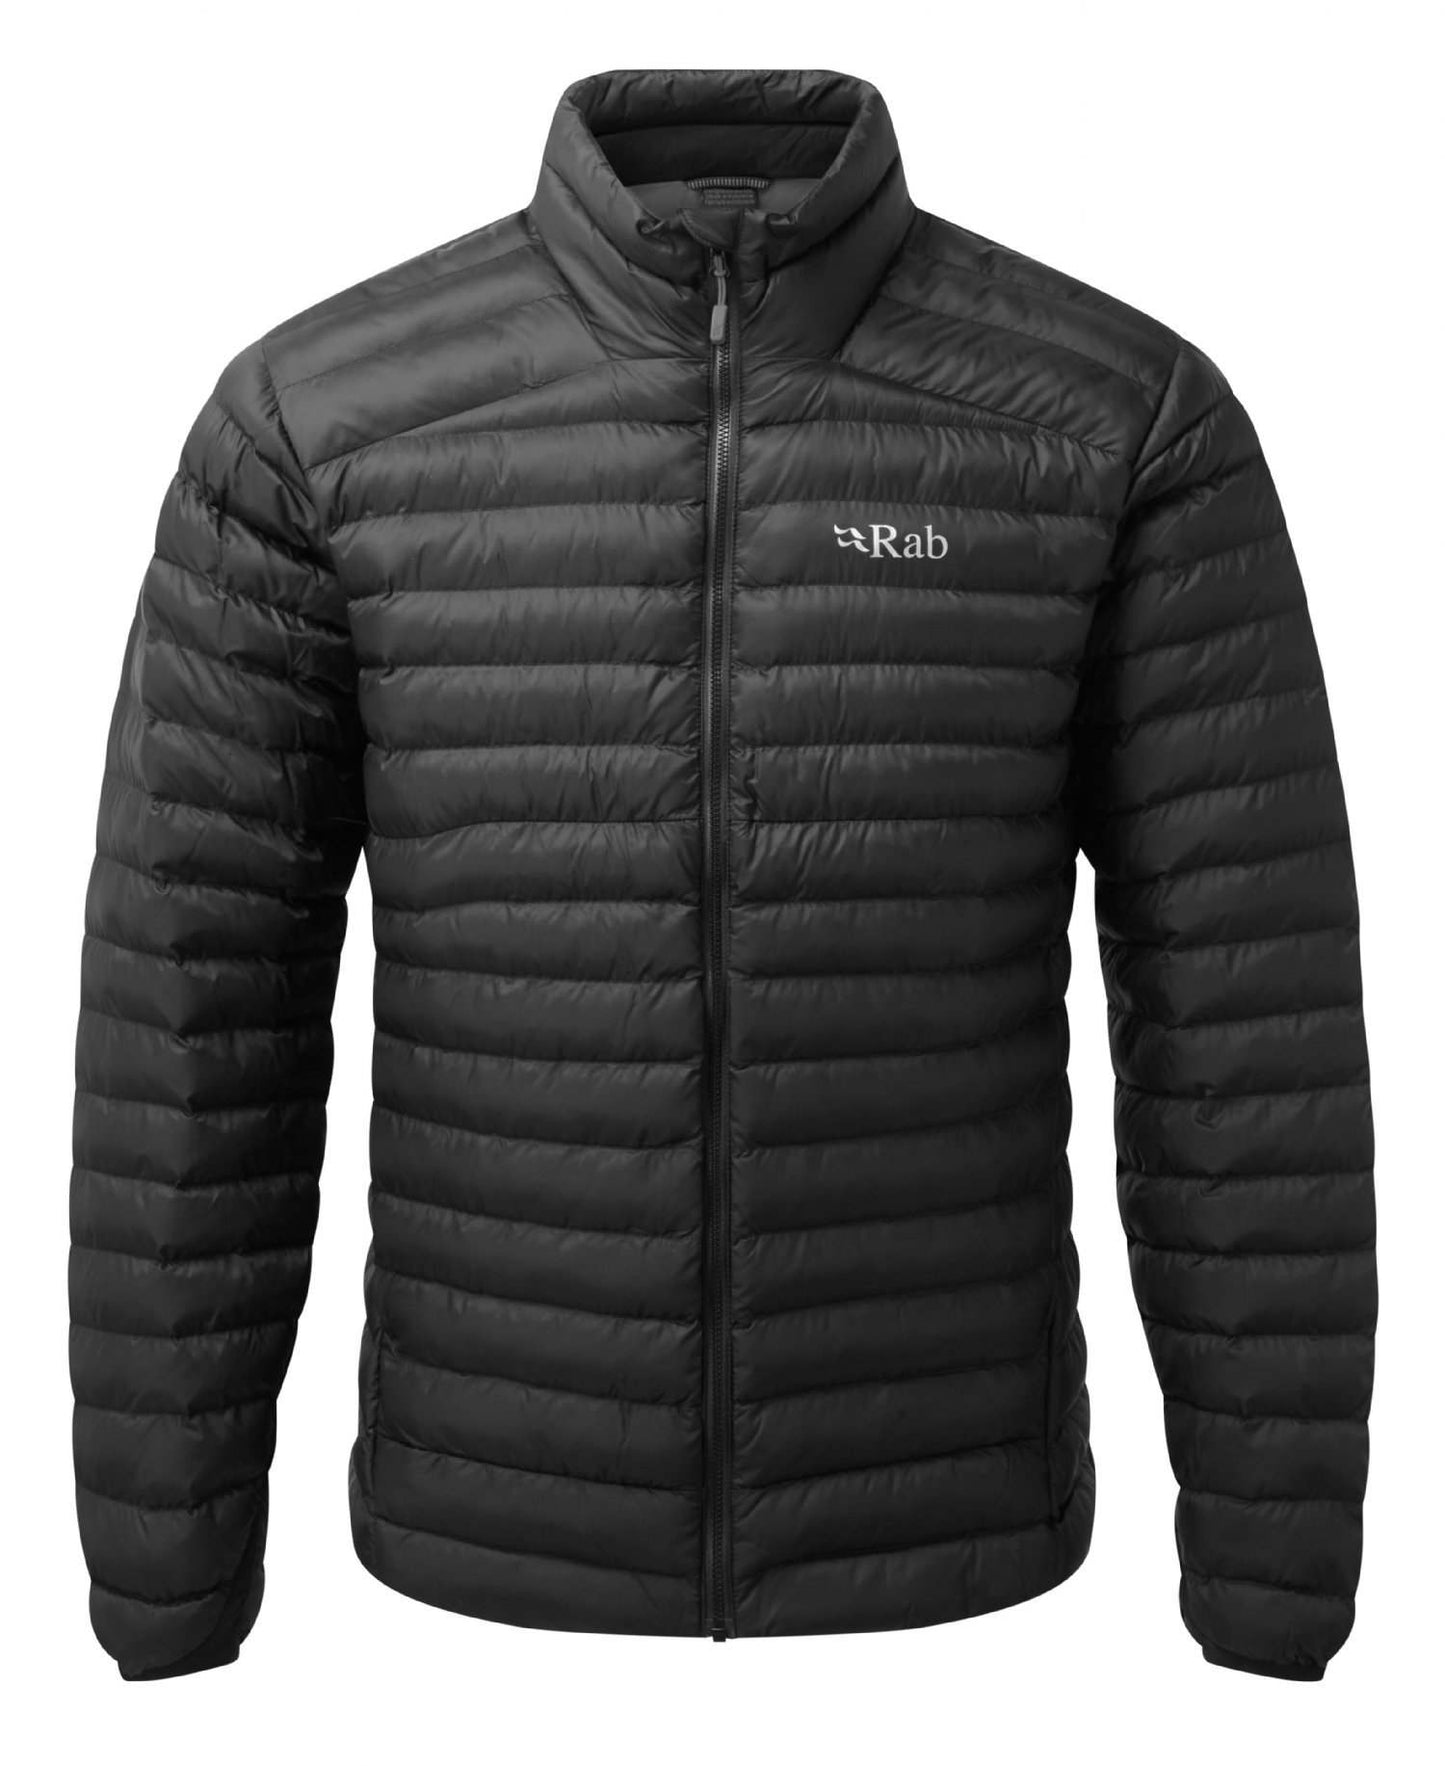 Rab Men's Cirrus Jacket - The Luxury Promotional Gifts Company Limited